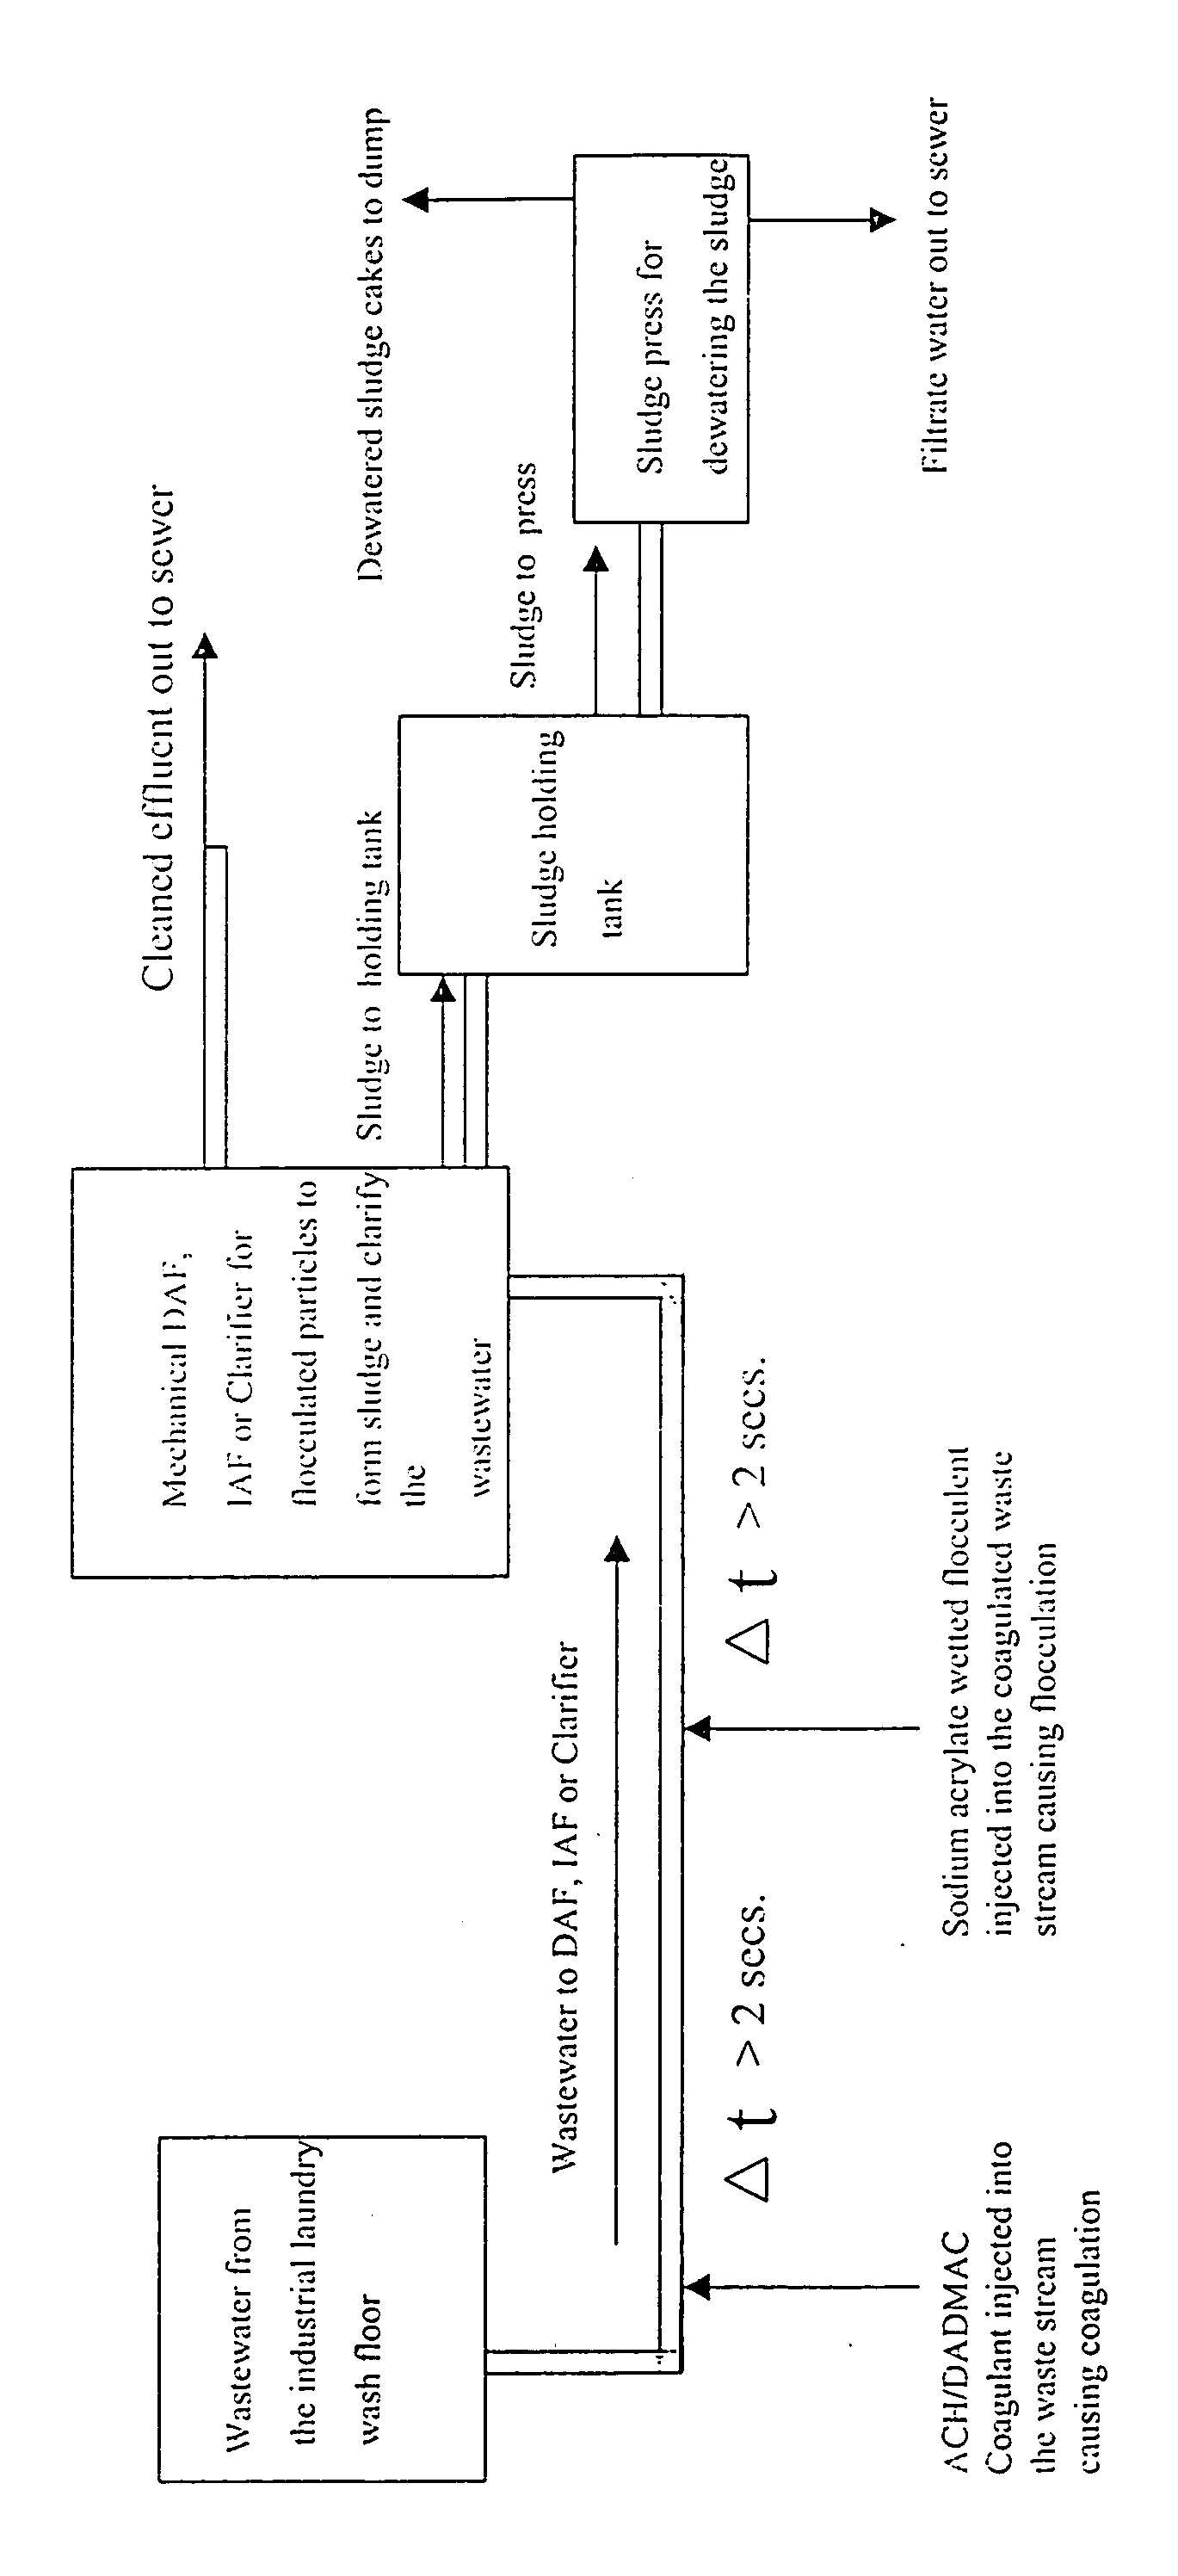 Method of clarifying industrial laundry wastewater using cationic dispersion polymers and anionic flocculent polymers